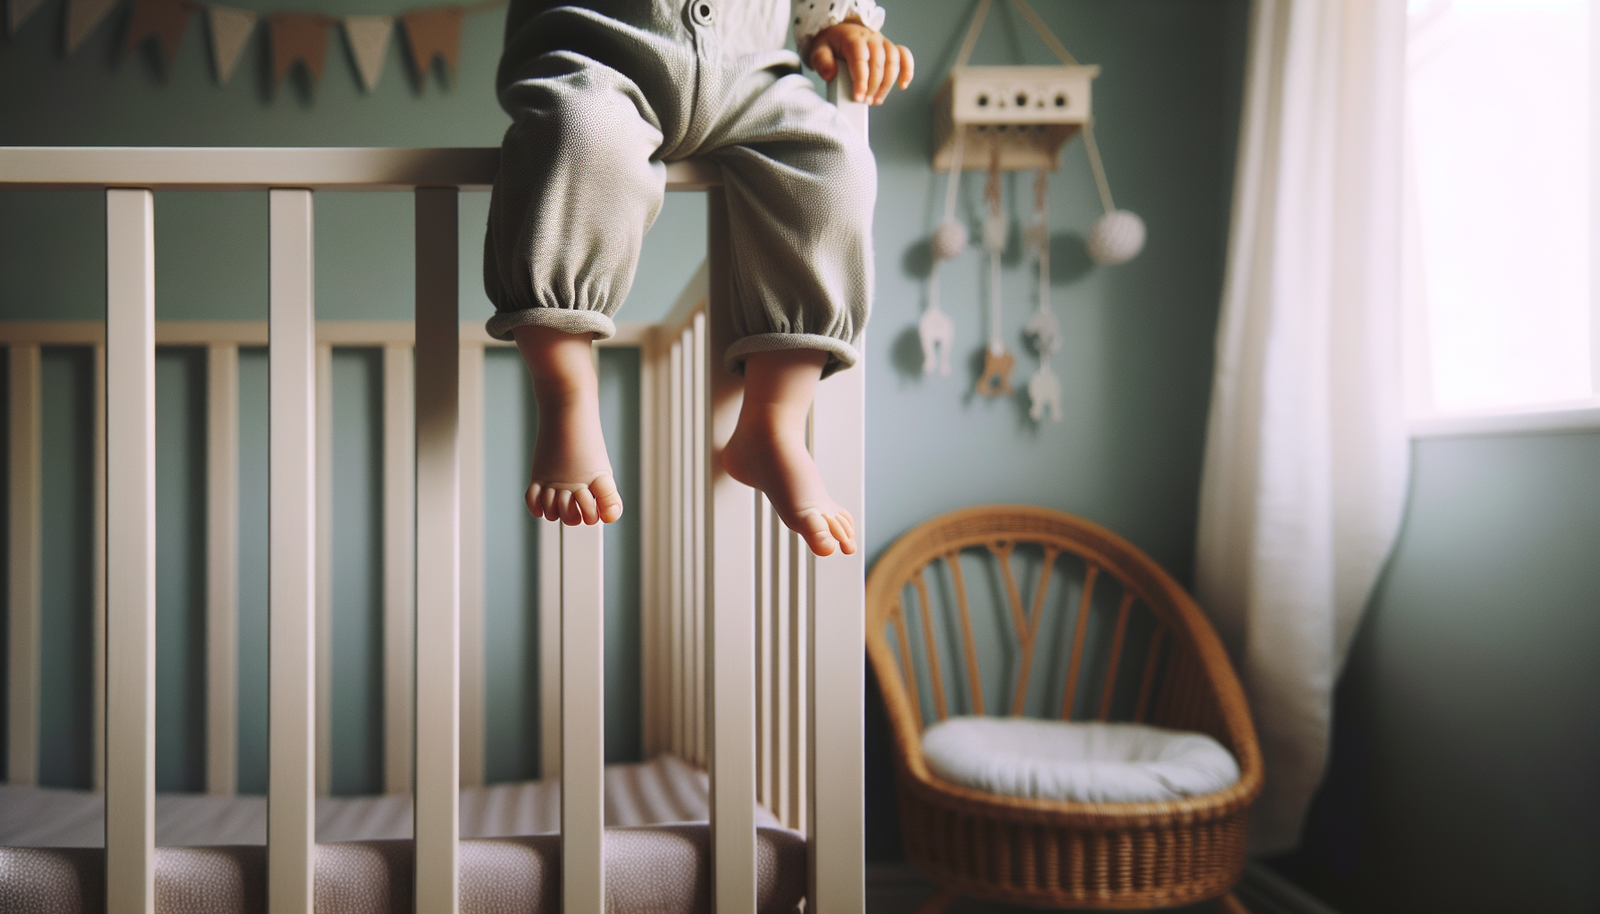 What To Do When Your Toddler Climbs Out of the Crib